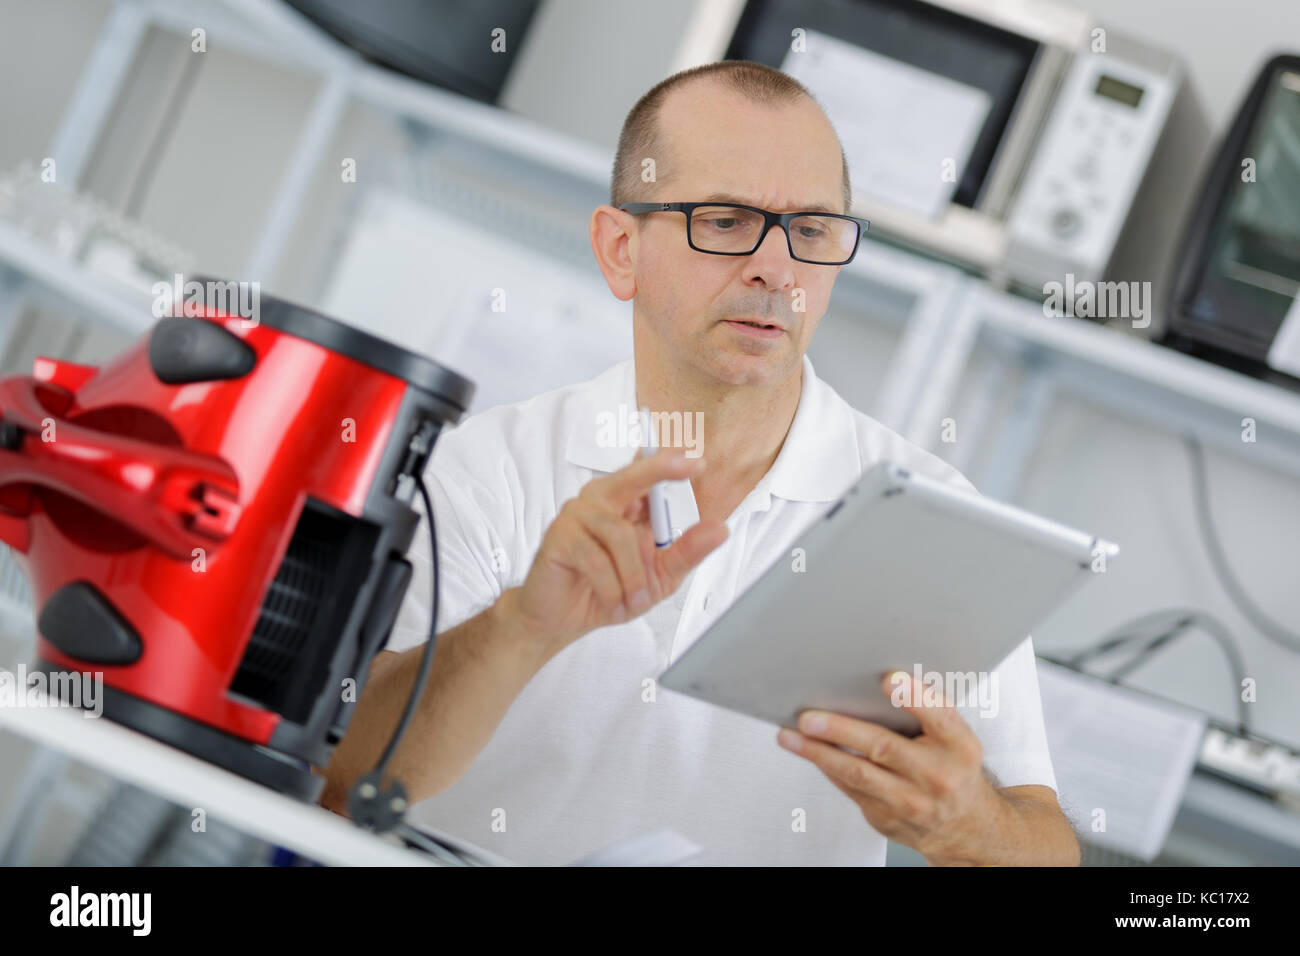 technician checks his table to fix a vaccum cleanner Stock Photo